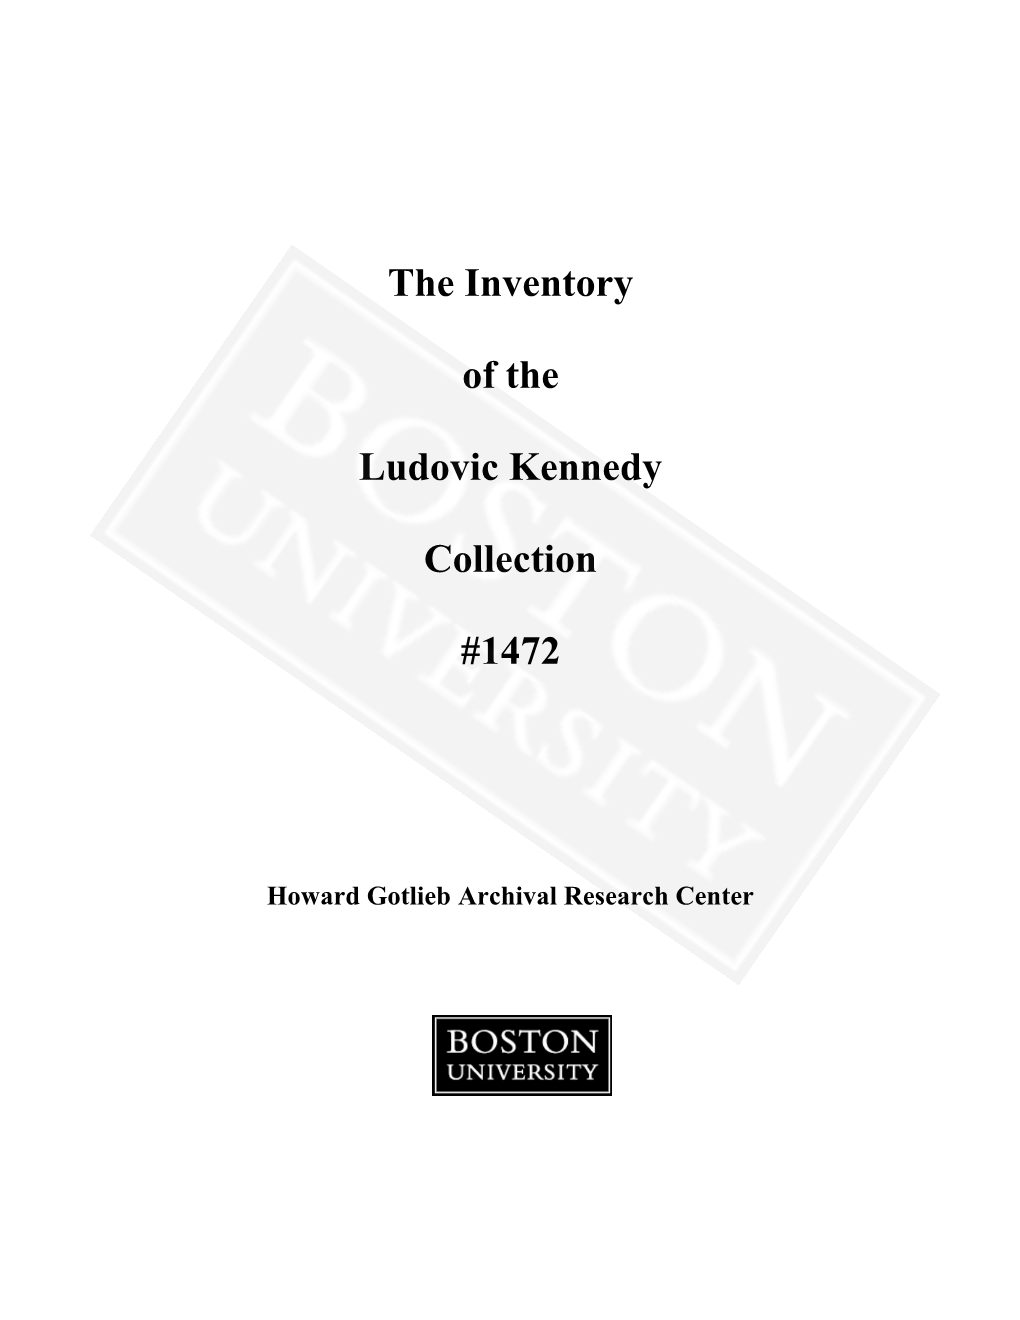 The Inventory of the Ludovic Kennedy Collection #1472